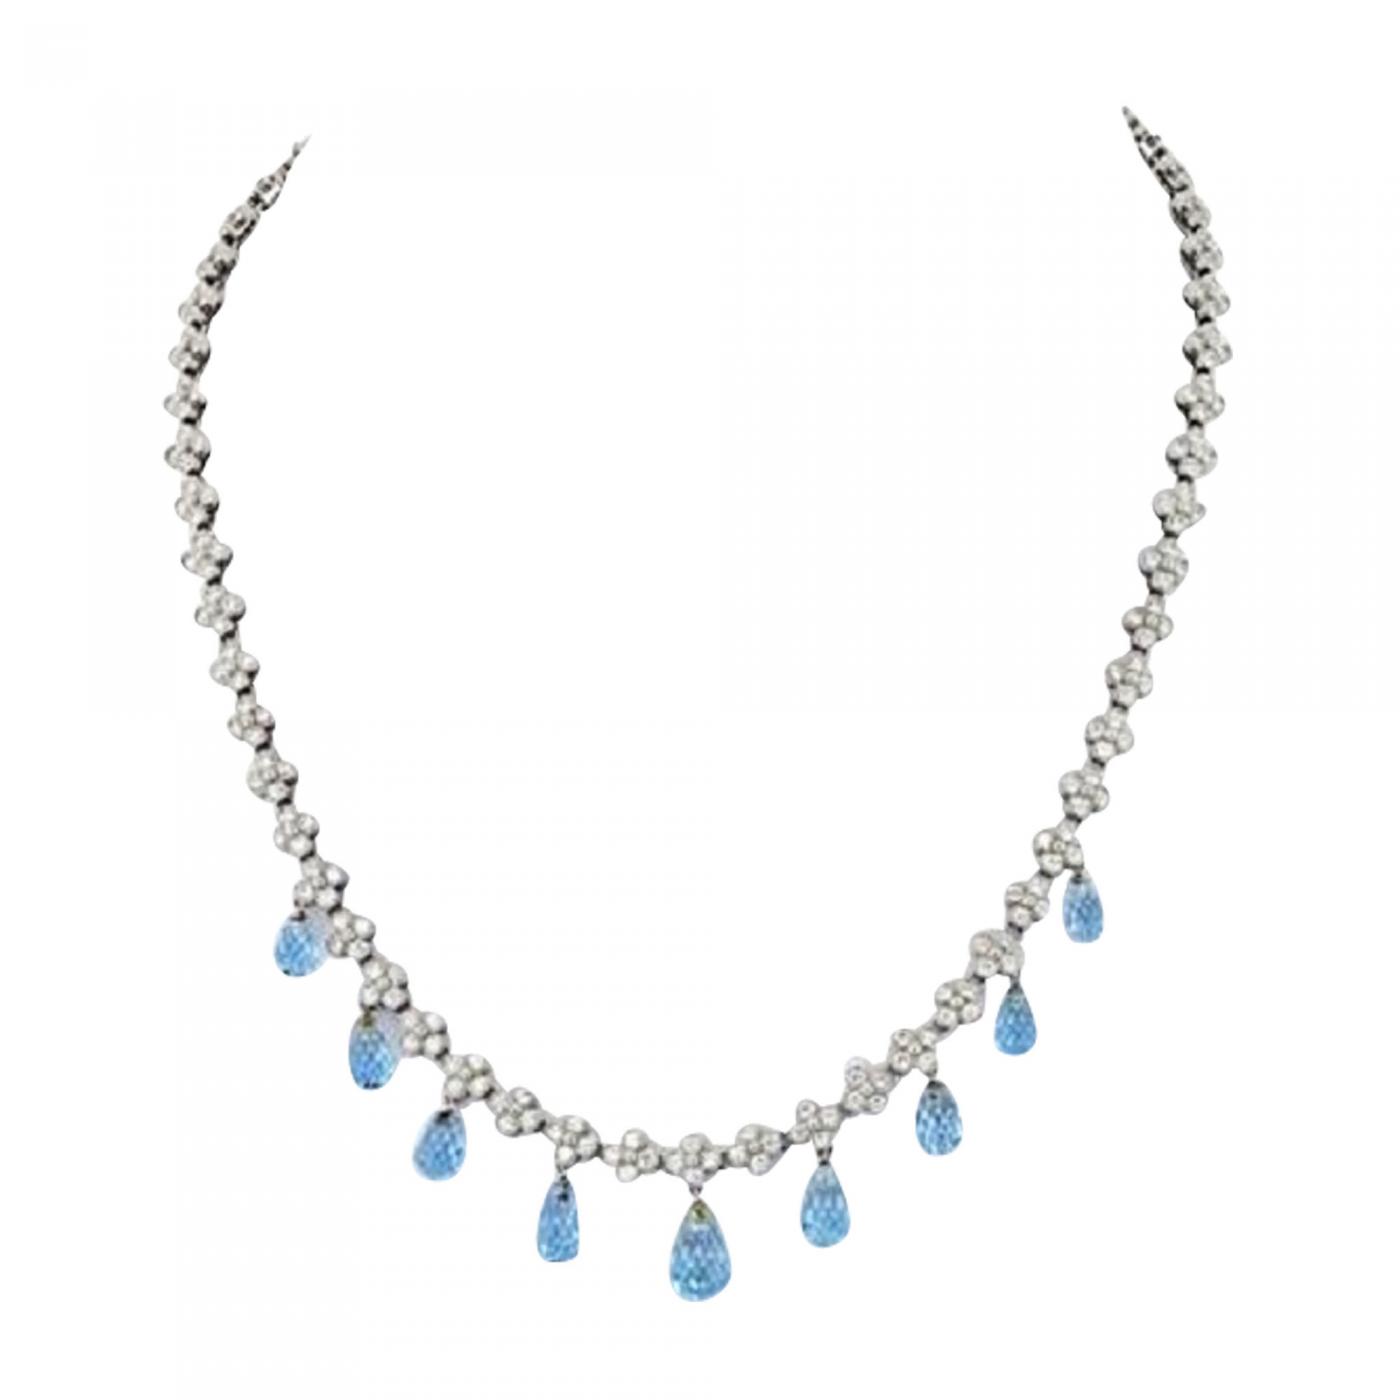 Elsa Peretti® Color by the Yard sprinkle necklace in silver with aquamarines.  | Tiffany & Co.